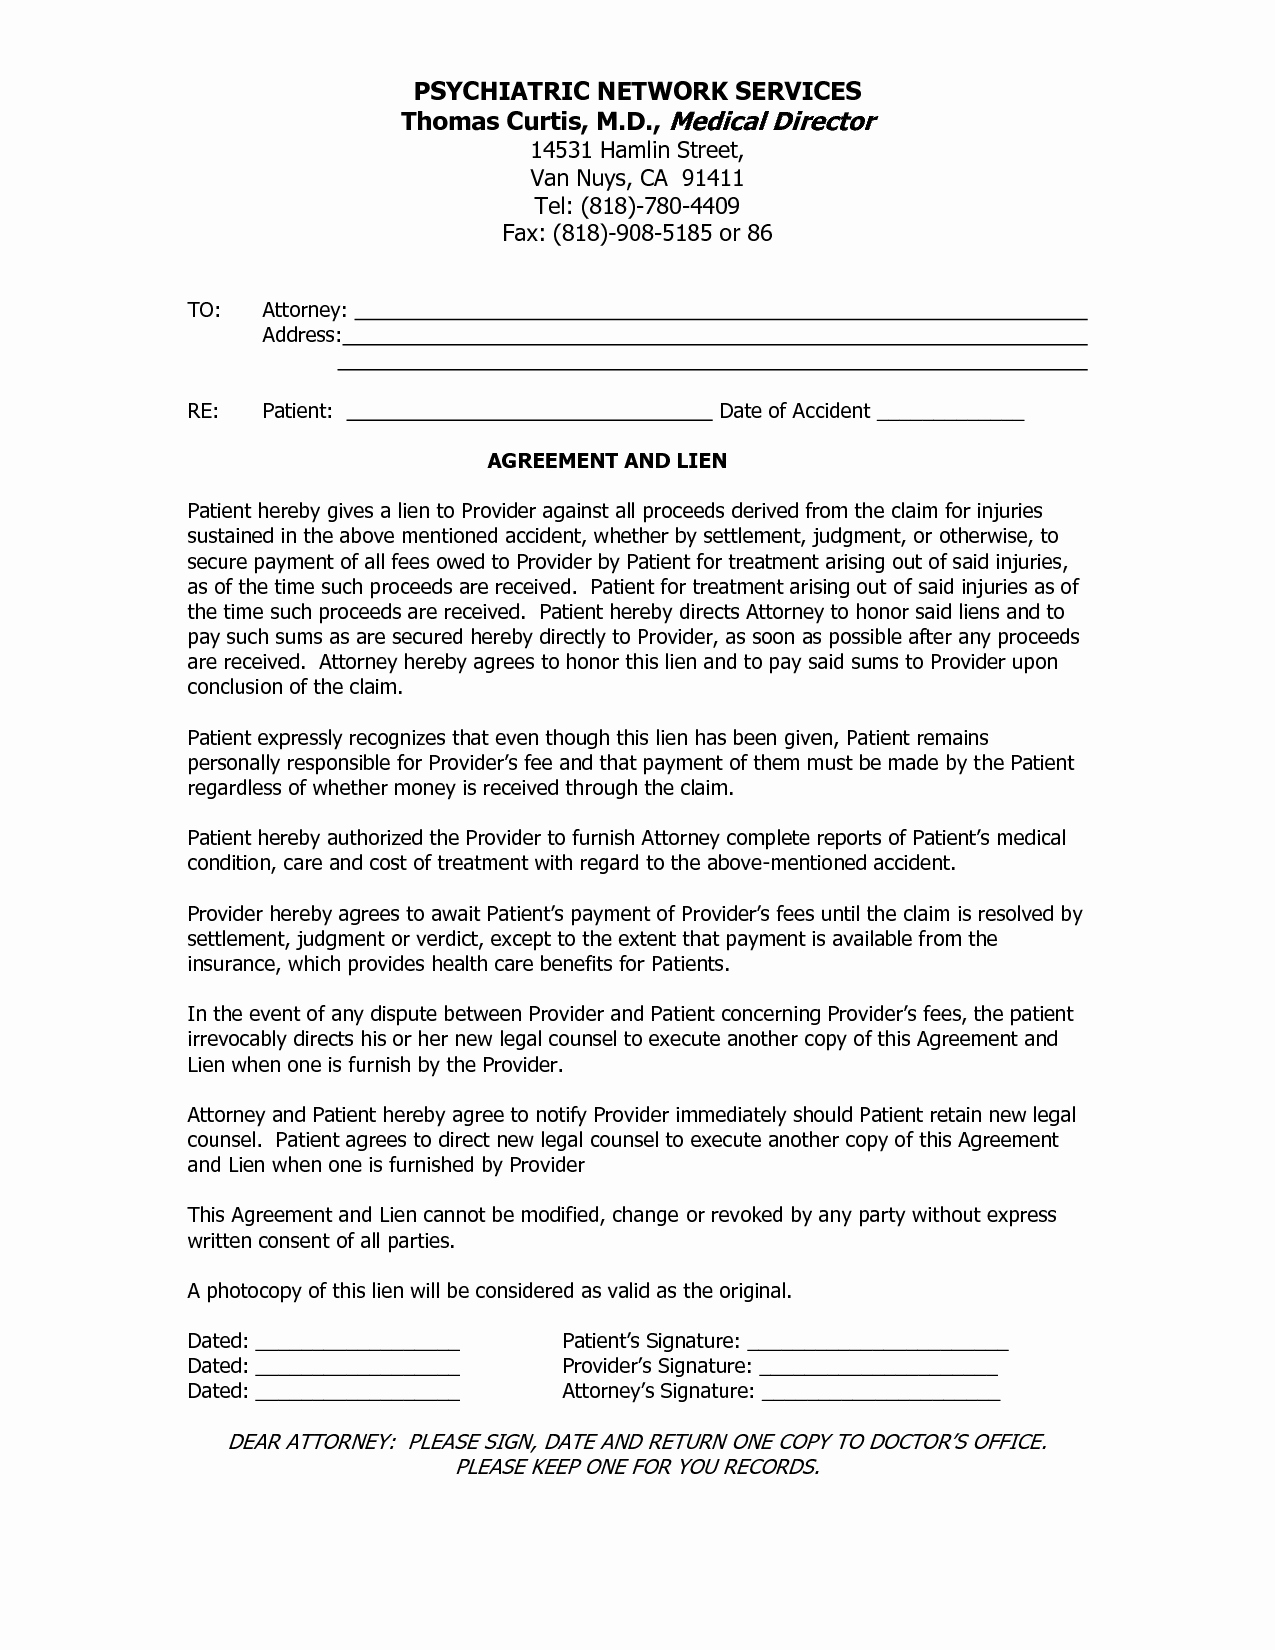 Car Accident Agreement Letter Between Two Parties Best Of Agreement Template Category Page 68 Efoza